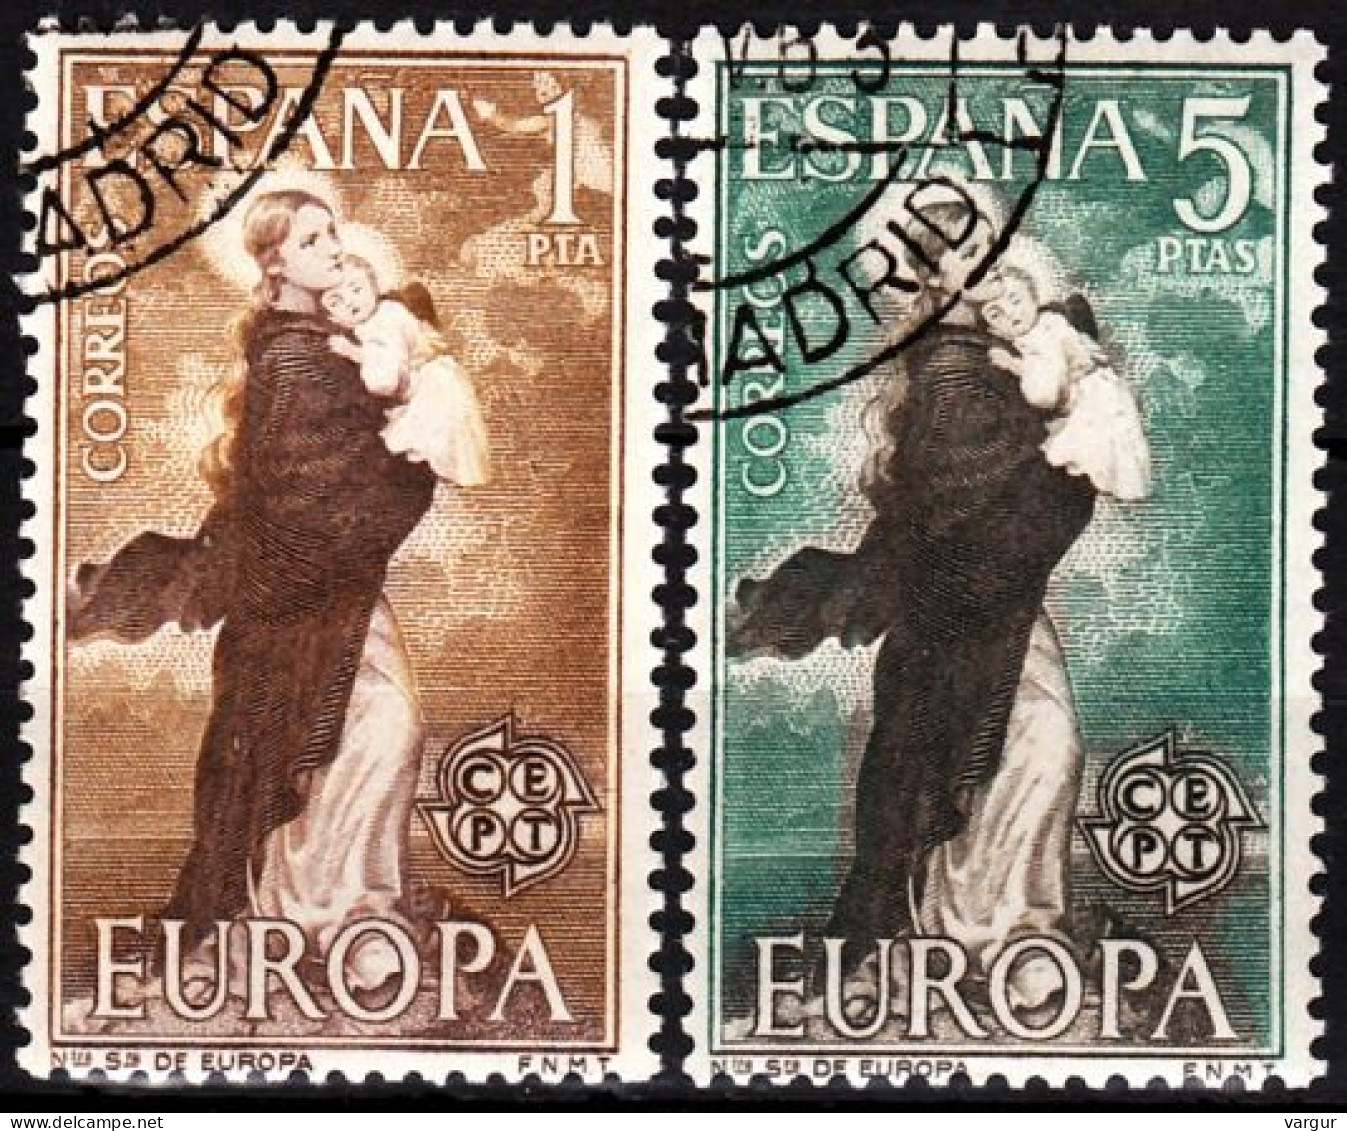 SPAIN 1963 EUROPA. Complete Set, Used / CTO - 1963